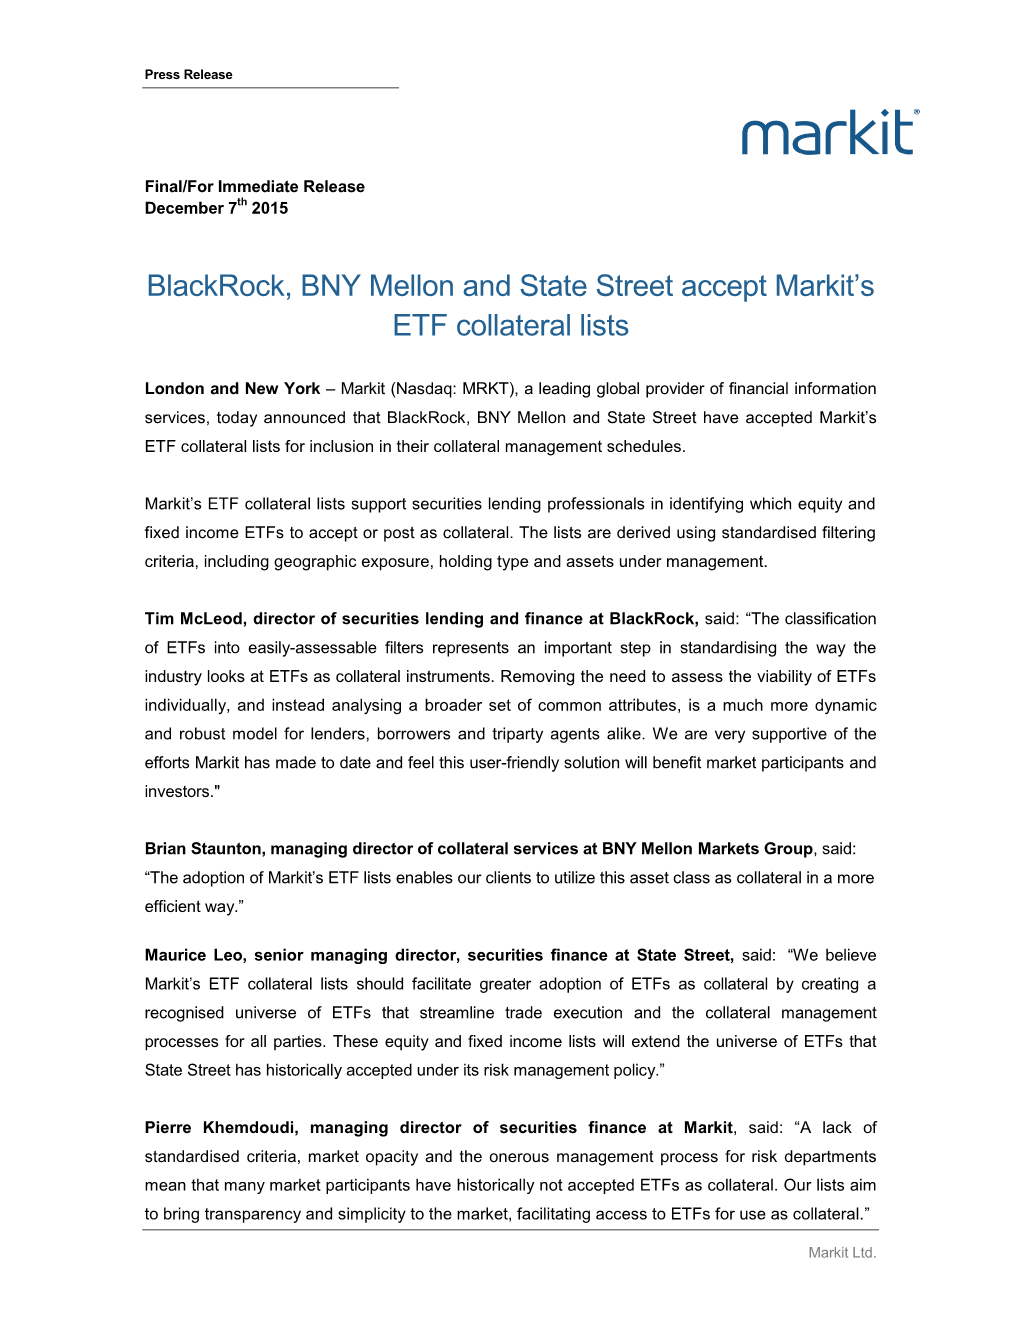 Blackrock, BNY Mellon and State Street Accept Markit's ETF Collateral